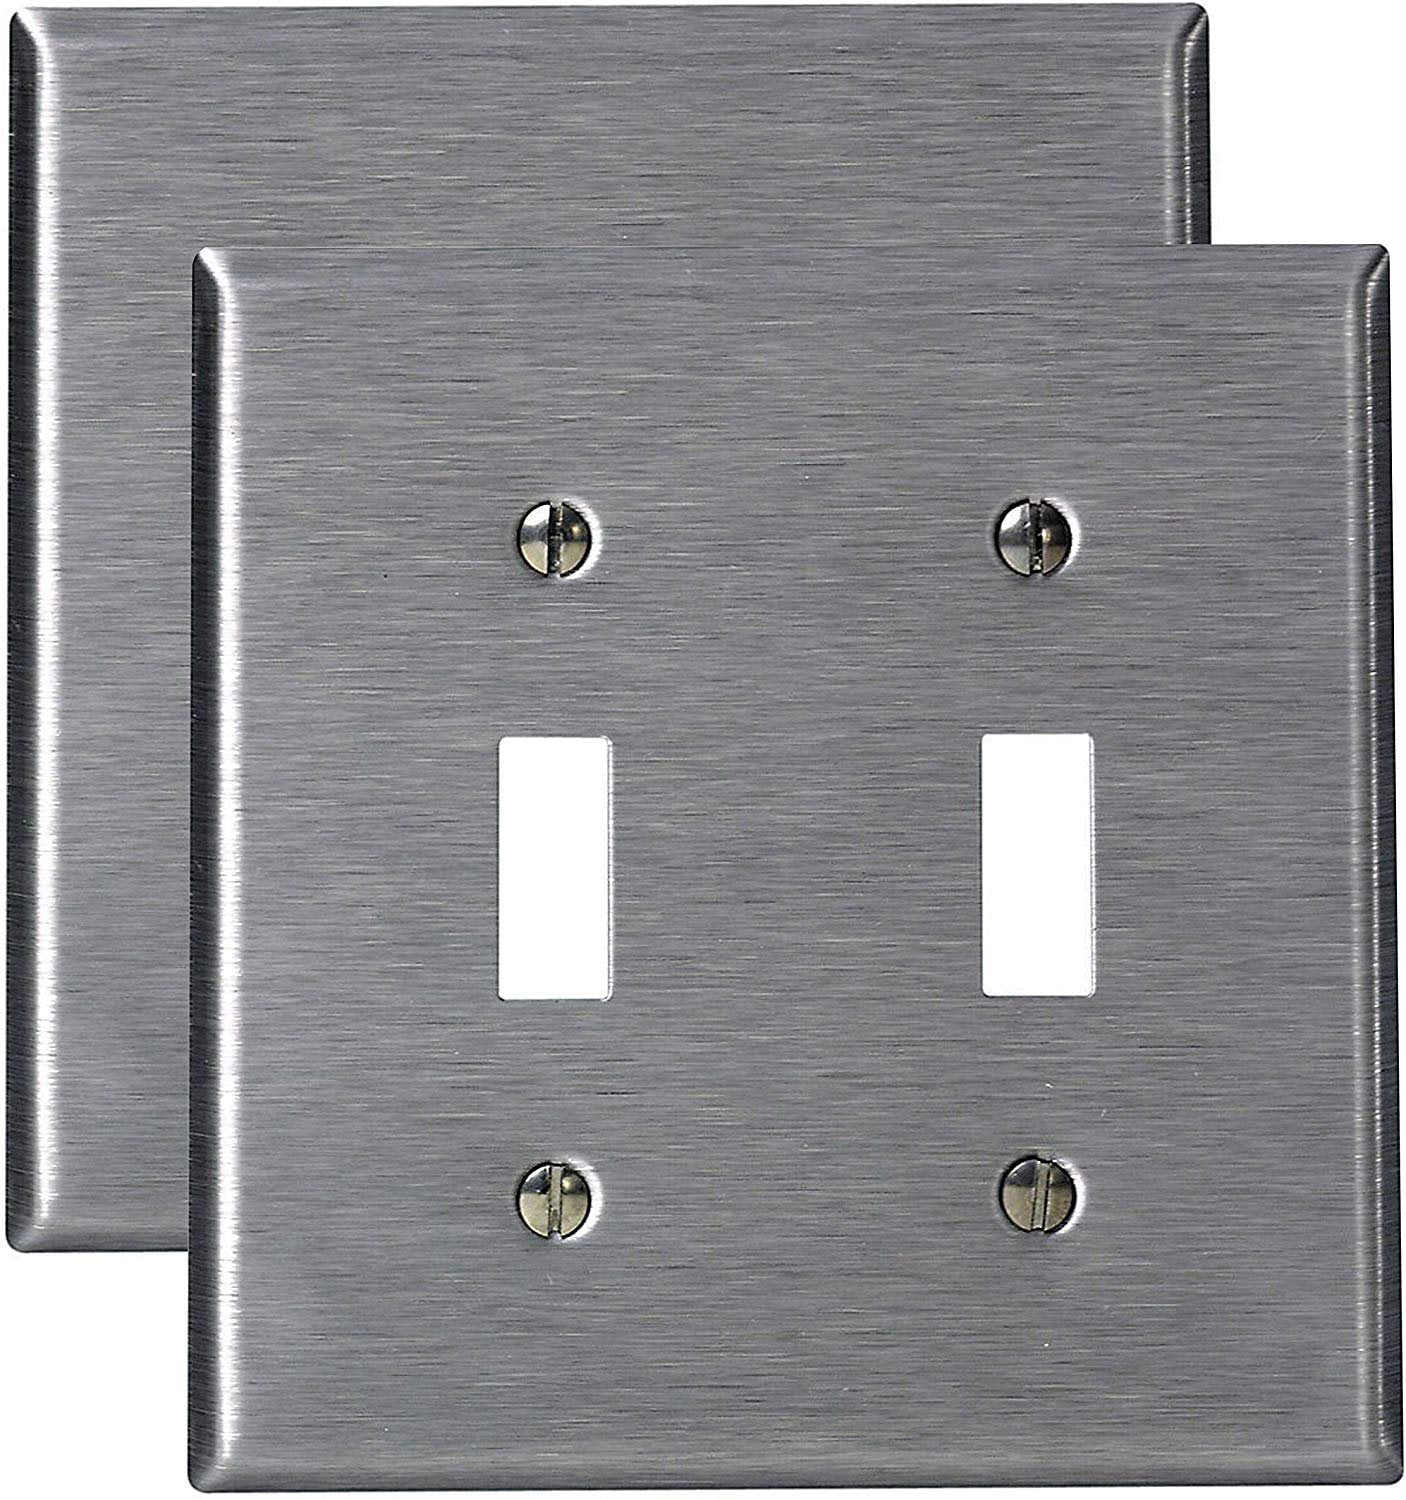 Pack of 2 Wall Plate Outlet Switch Covers by SleekLighting | Decorative